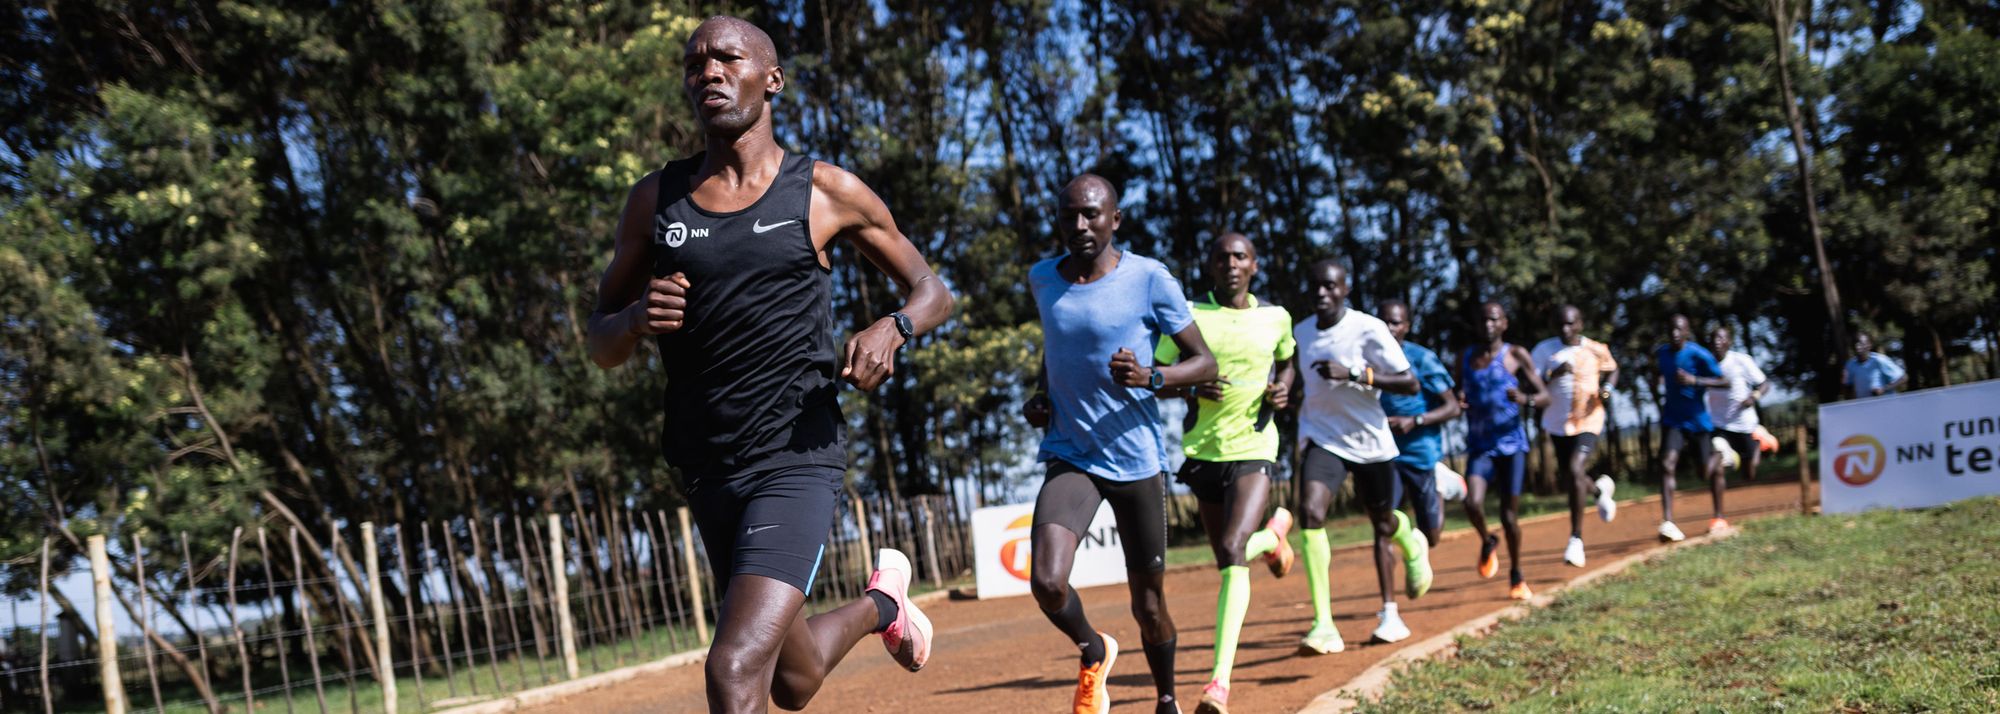 An insight into what makes Kenya such a successful distance-running nation